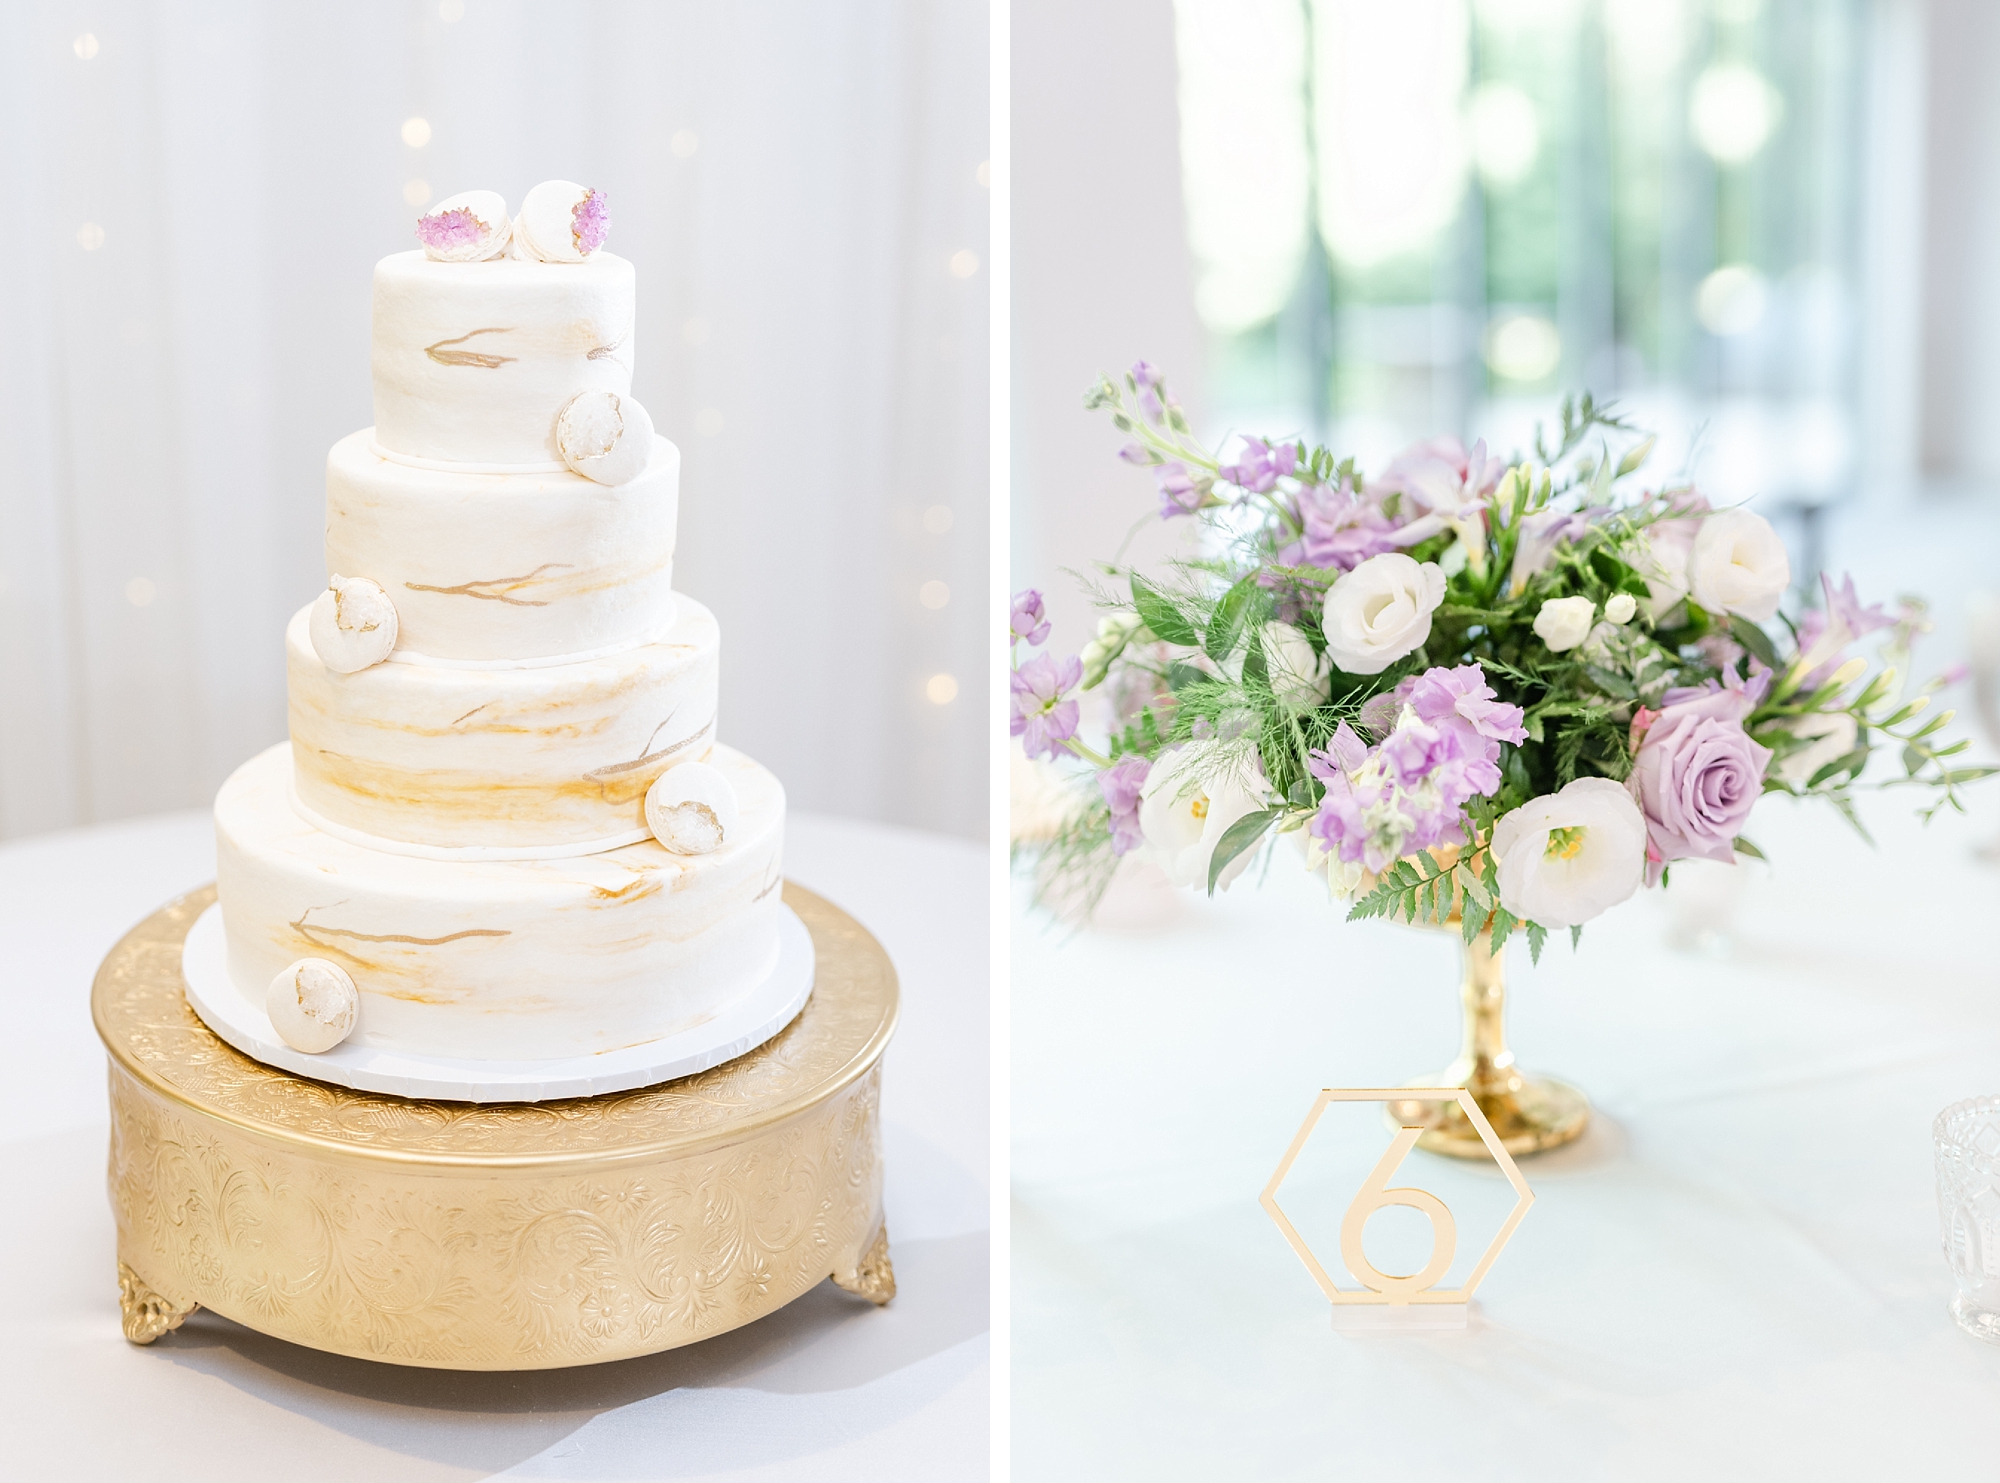 wedding cake with gold and white macaroons and centerpieces with white and purple flowers for Brookshire wedding reception